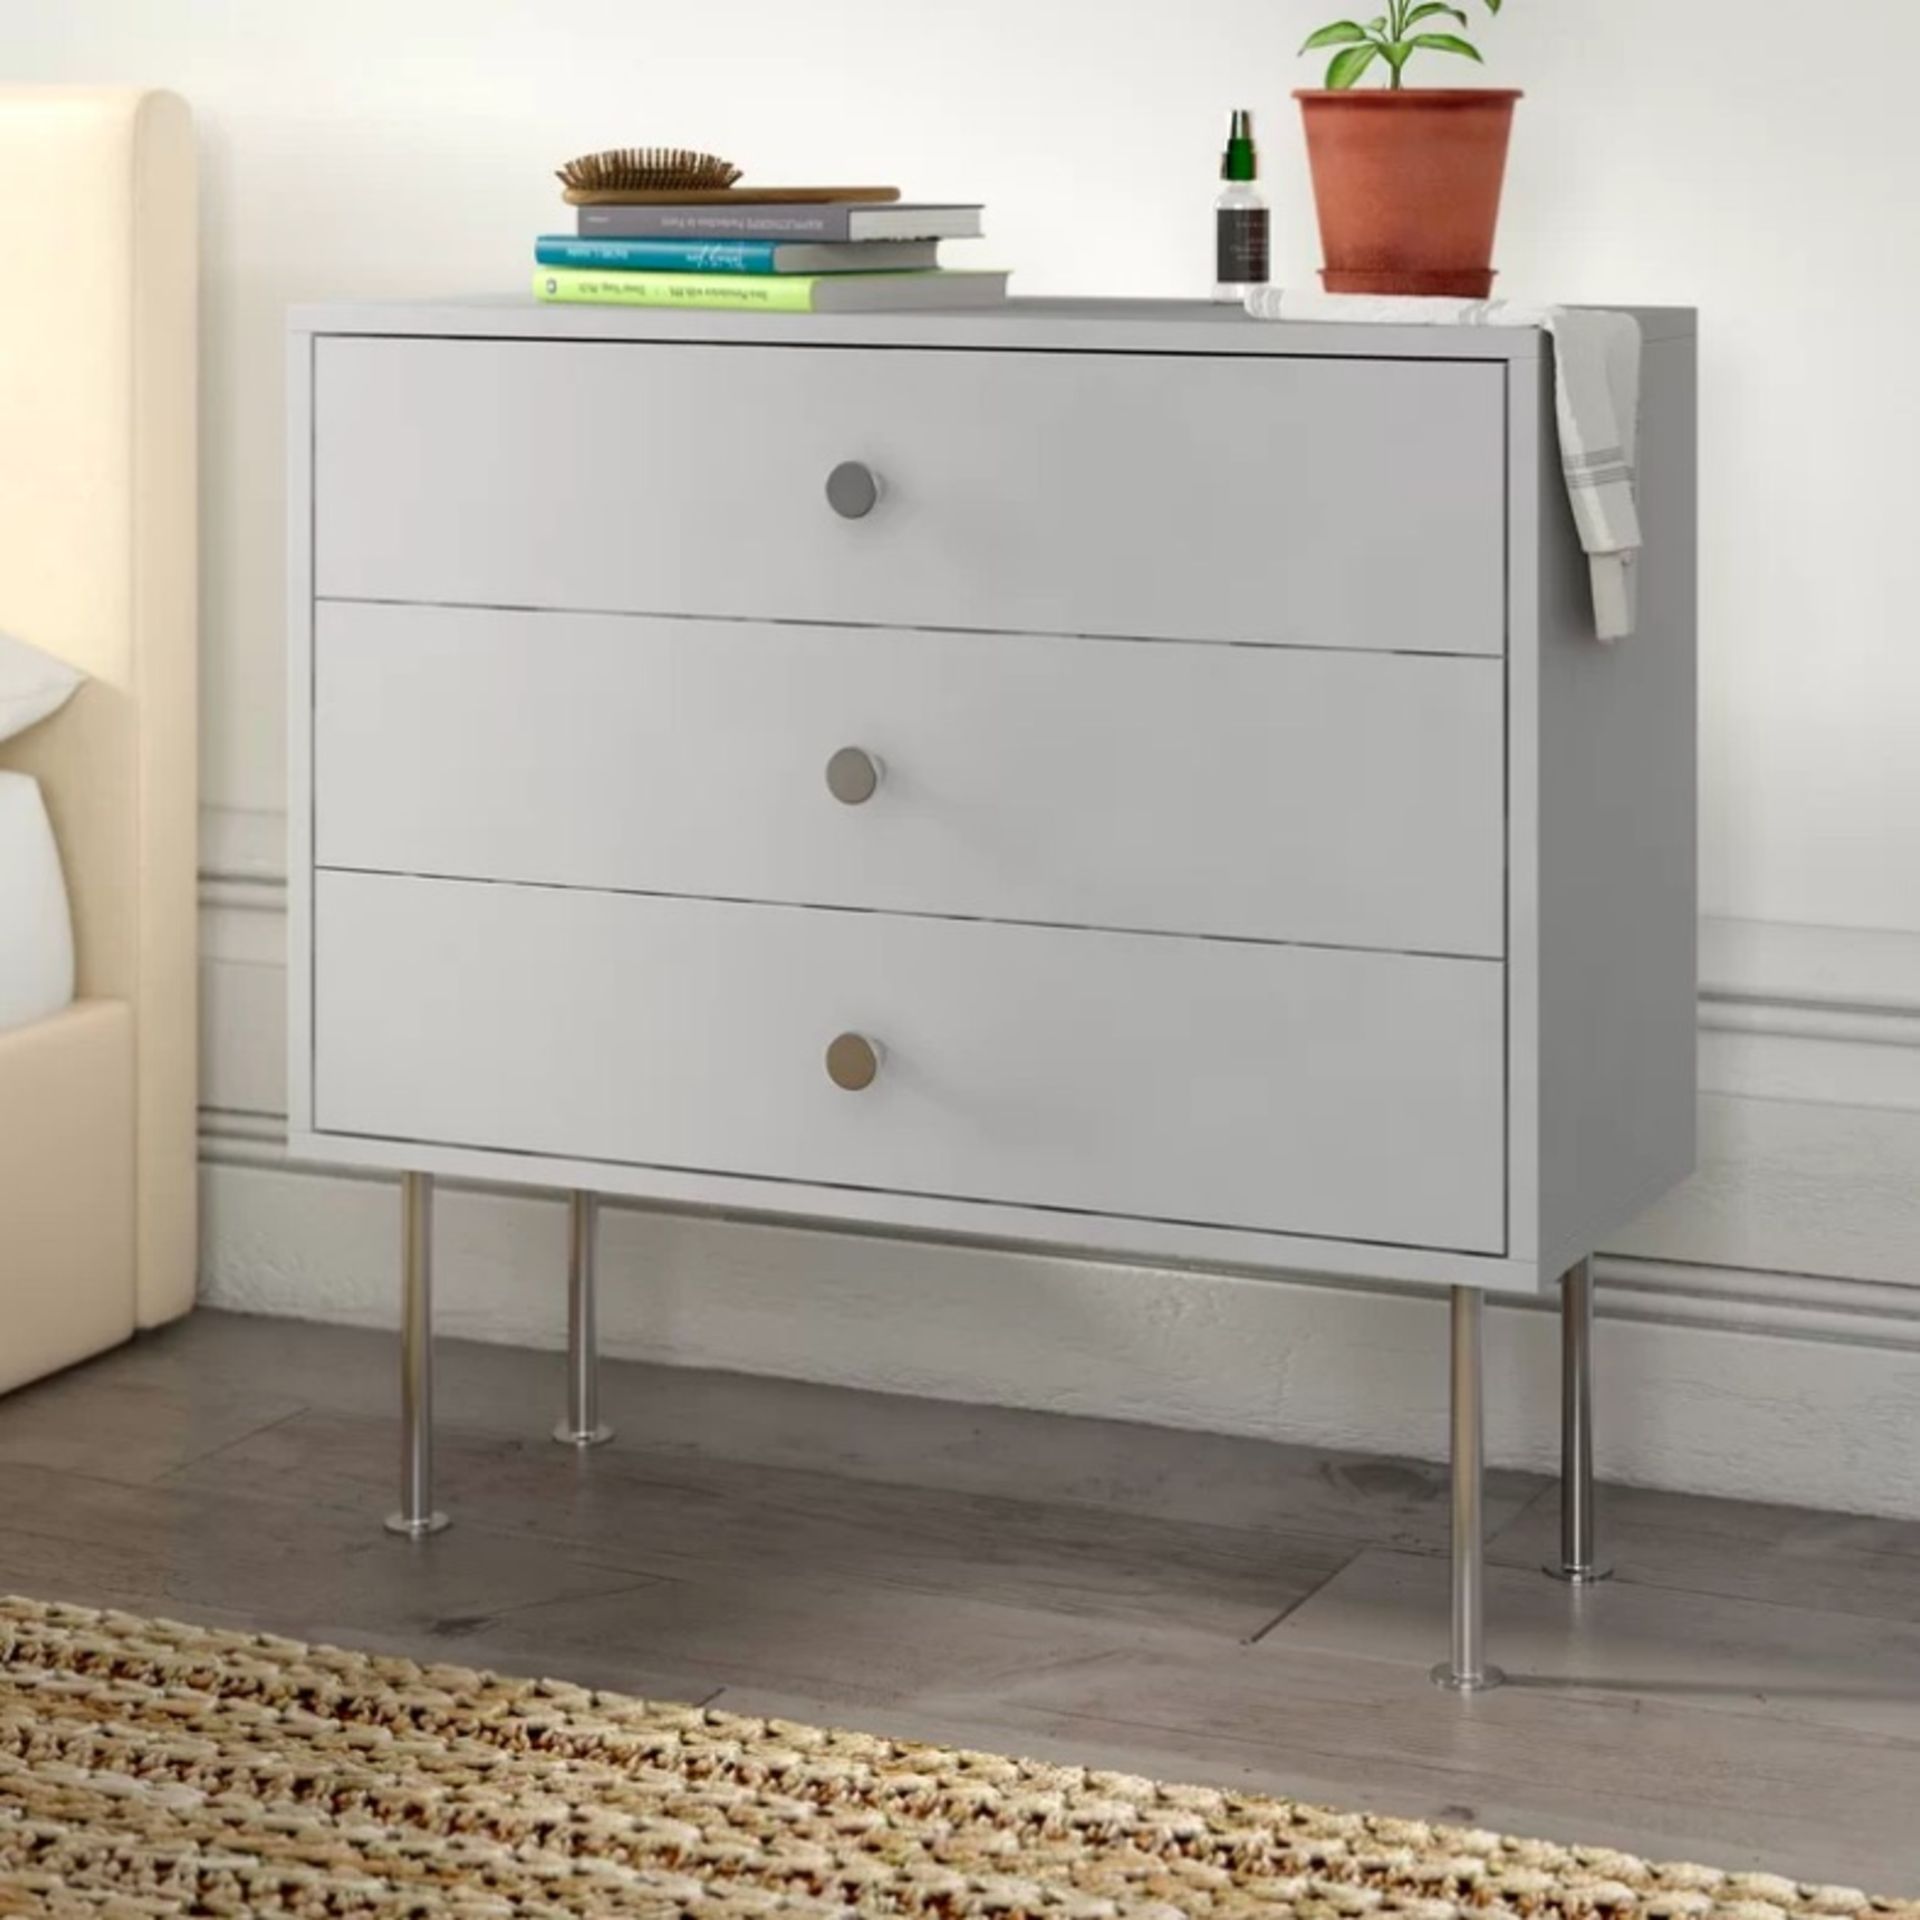 Elegant 3 Drawer Chest is a petite storage solution, perfectly made for small items like pieces of